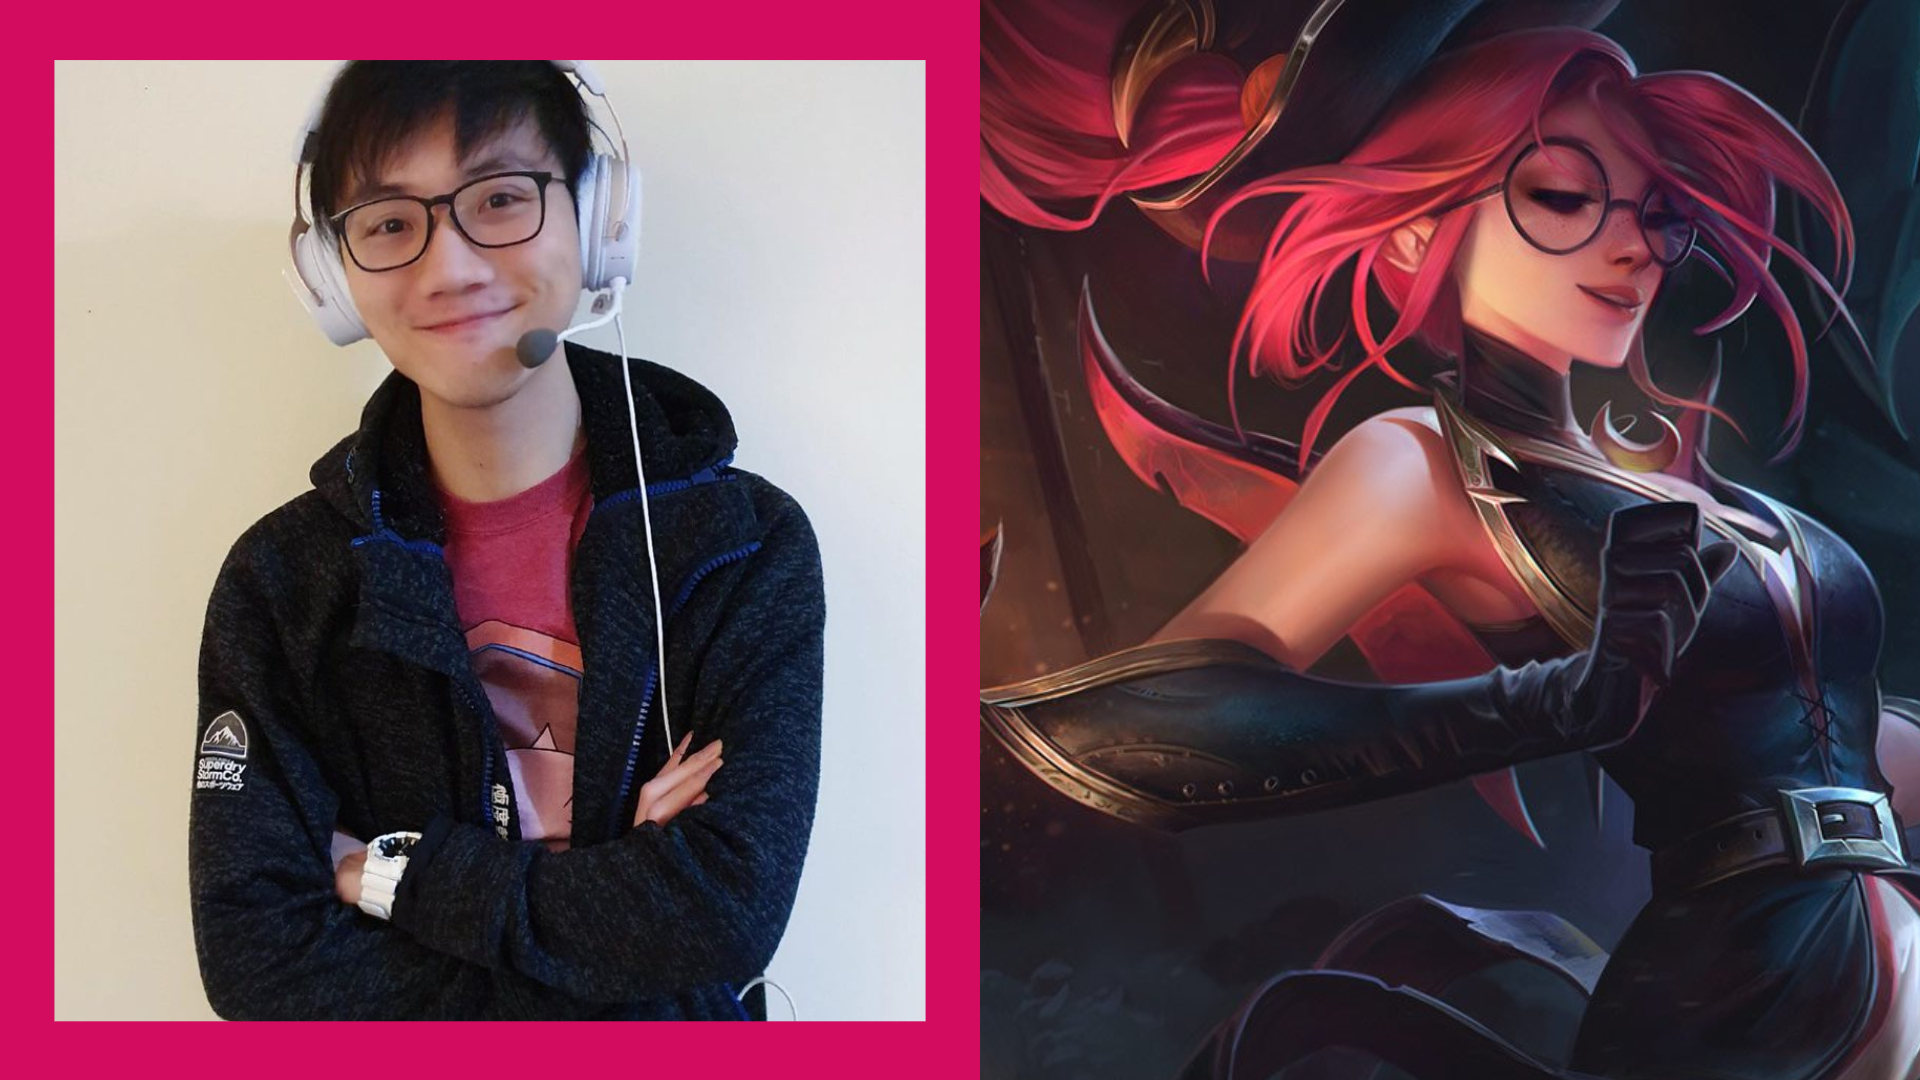 Twitch streamer BoxBox programmed a bot to play Janna in League of